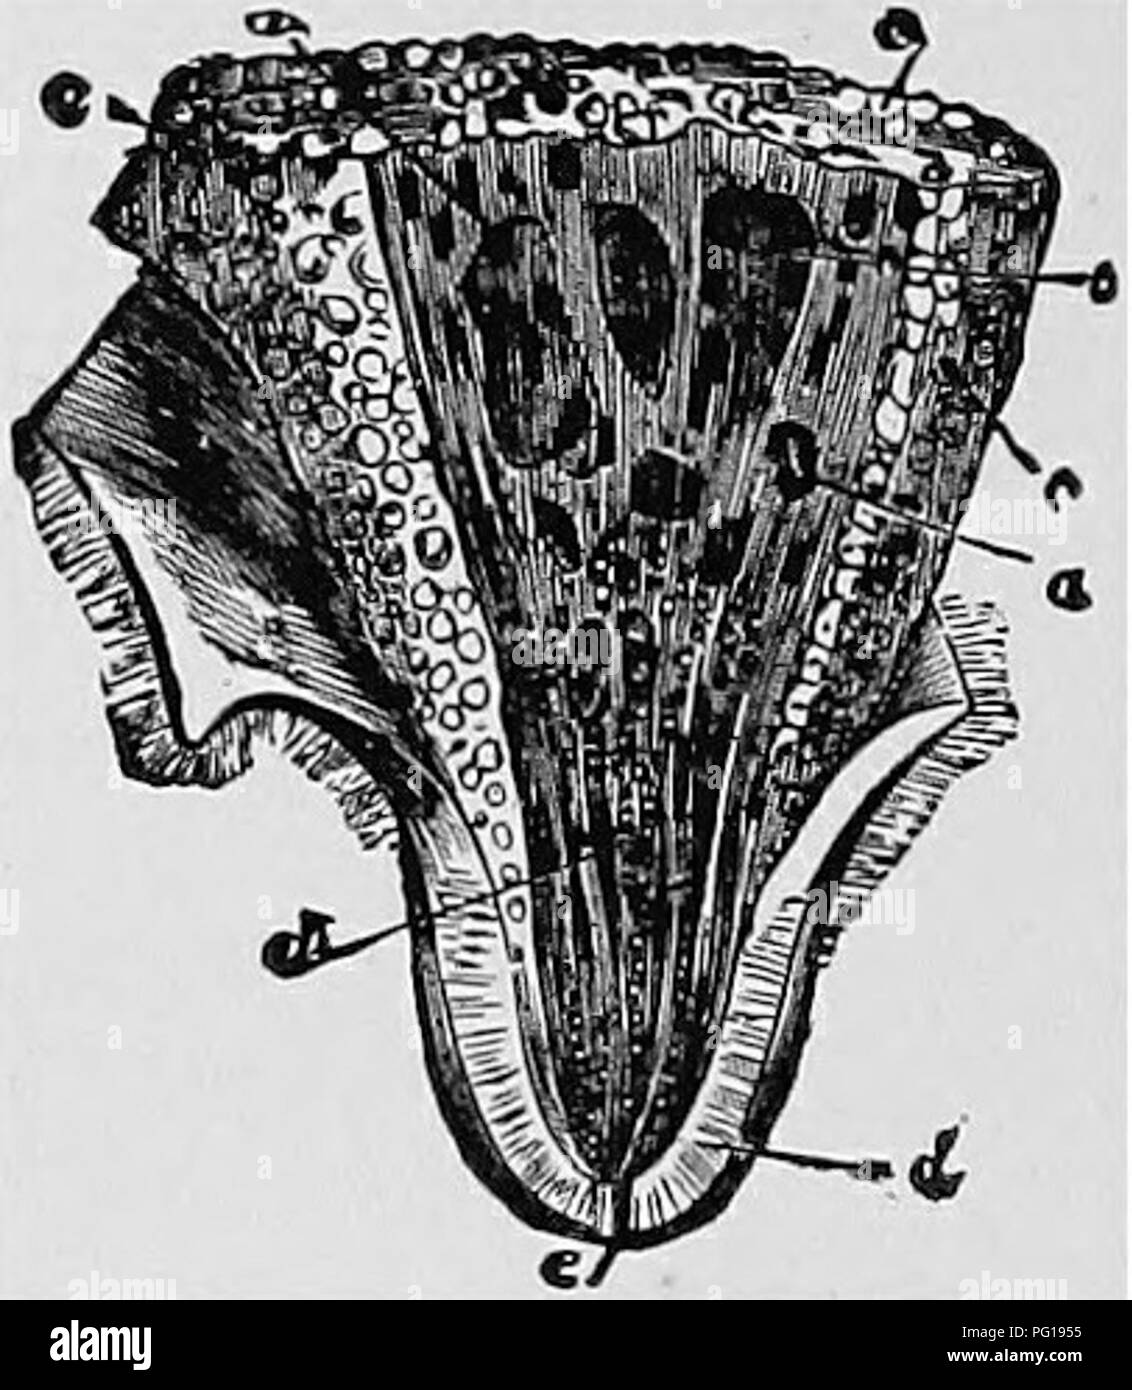 . Veterinary obstetrics; a compendium for the use of students and practitioners. Veterinary obstetrics. 26 . VETERINARY OBSTETRICS. In the small ruminants there are two mammae and two teats, constructed like those of the Cow.. Fig. 13. Section of the Cow's Teat. a, a. Principal Lactiferous Ducts; b, Lactiferous Sinus; c, c. Acini; d. Elastic or Dartoid Tissue of the Teat; e, Orifice of the Teat. In the Pig the mammae are ten or twelve in number, disposed by pairs in two parallel rows, extending from the inguinal region to beneath the thorax, and distinguished as inguinal, abdominal, and thorac Stock Photo